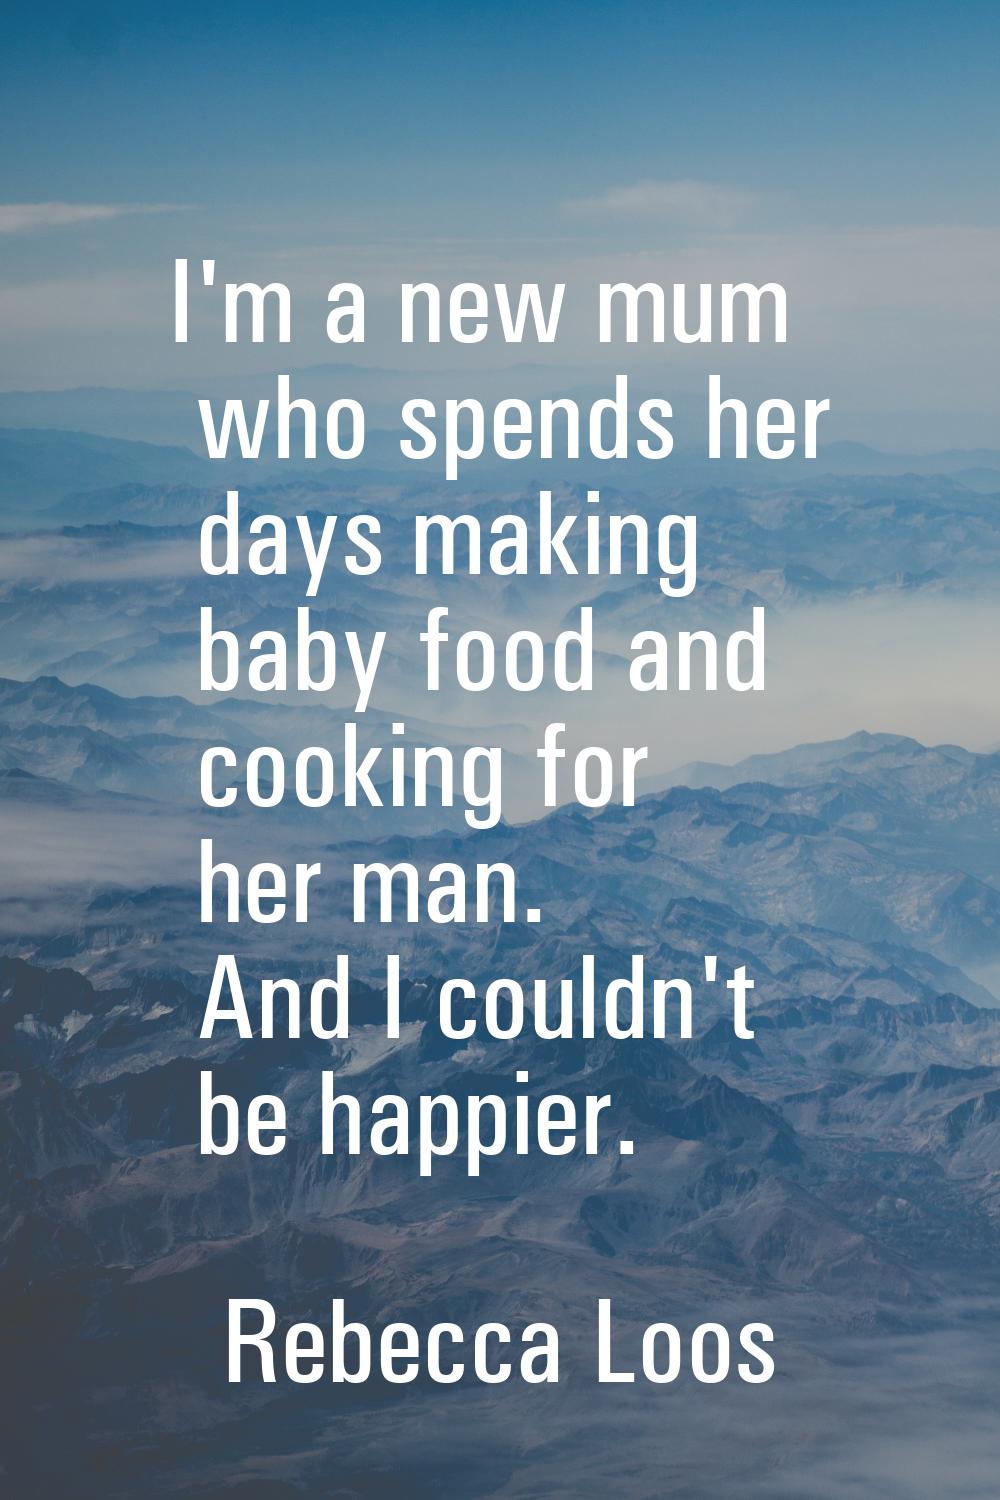 I'm a new mum who spends her days making baby food and cooking for her man. And I couldn't be happi